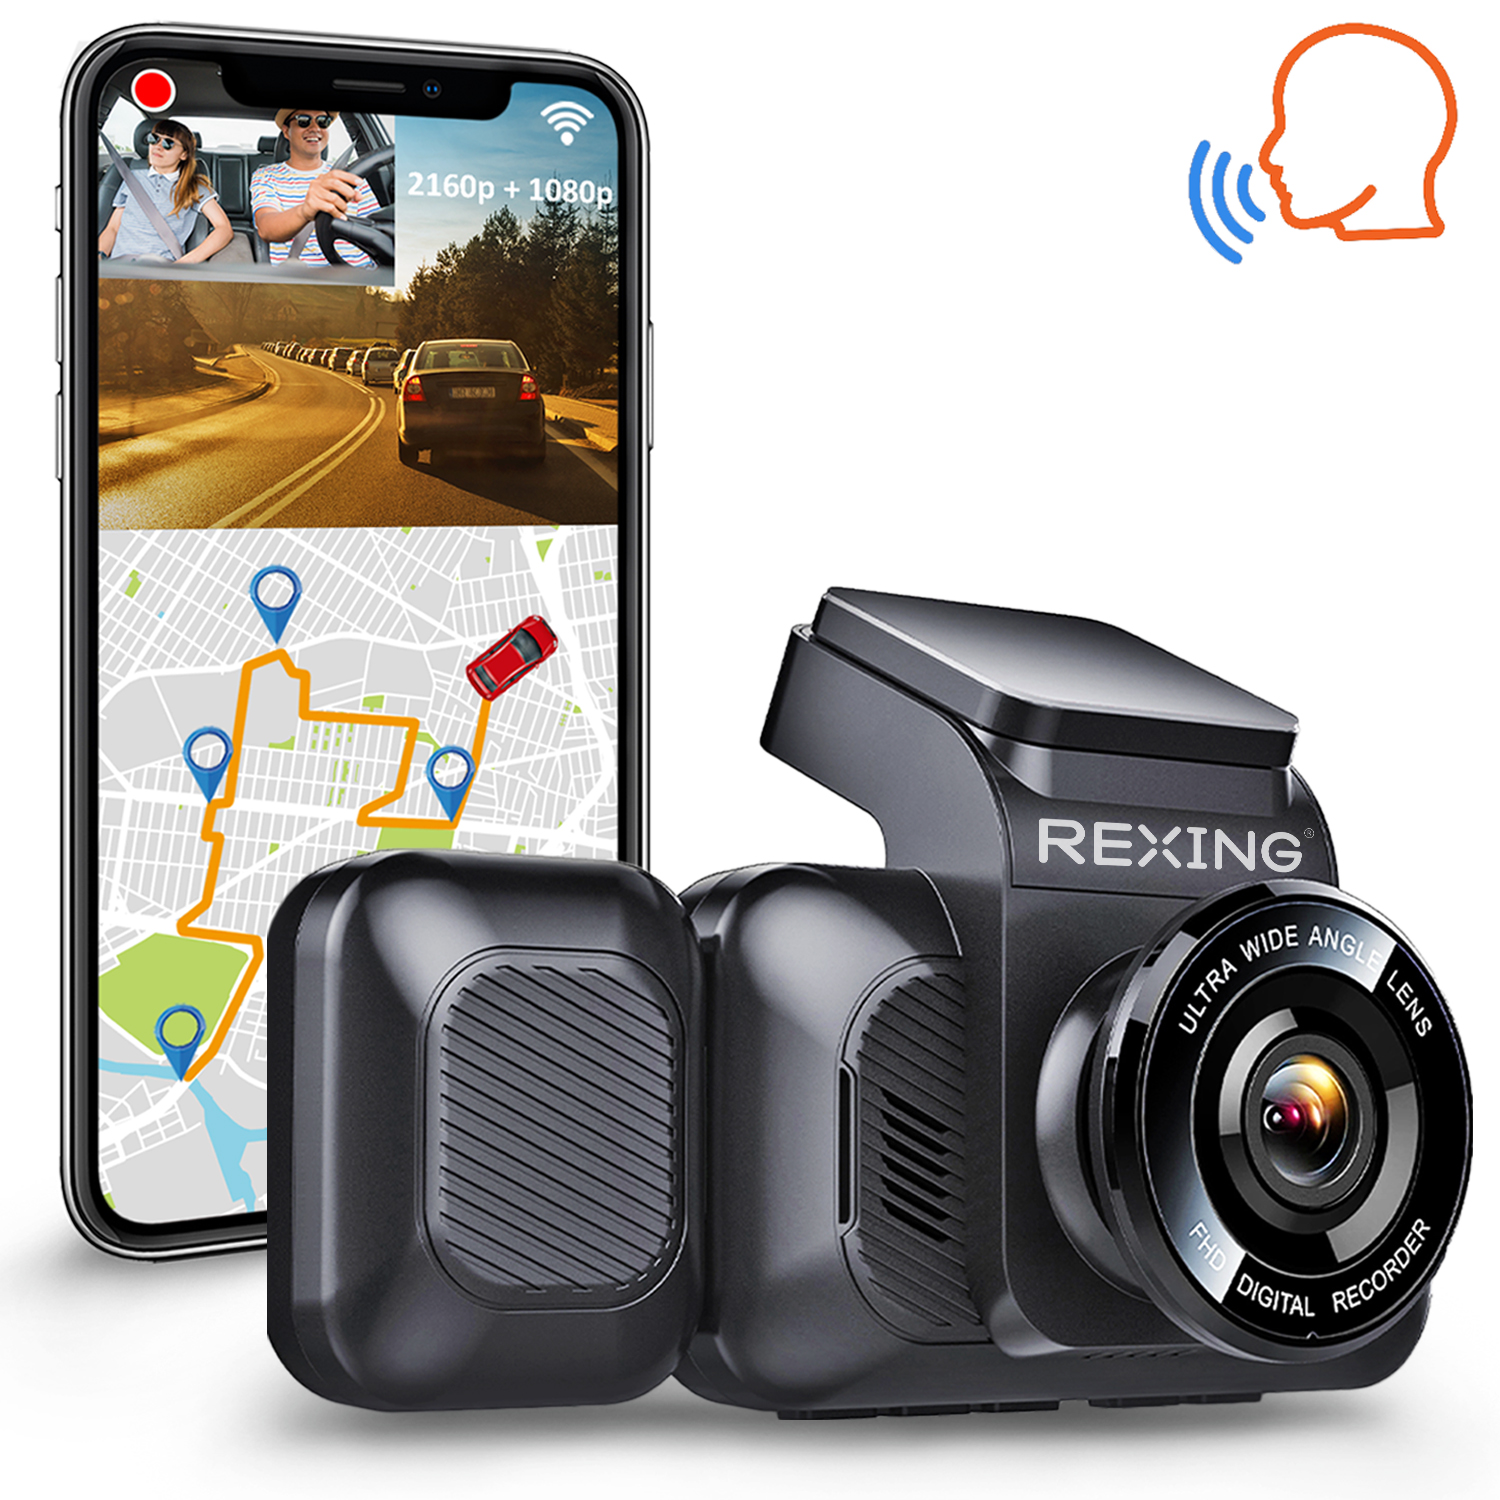 REXING V5C Basic Dash Cam Front 4K & 1080p Cabin Camera w/ Modular Capabilities, WiFi, and GPS